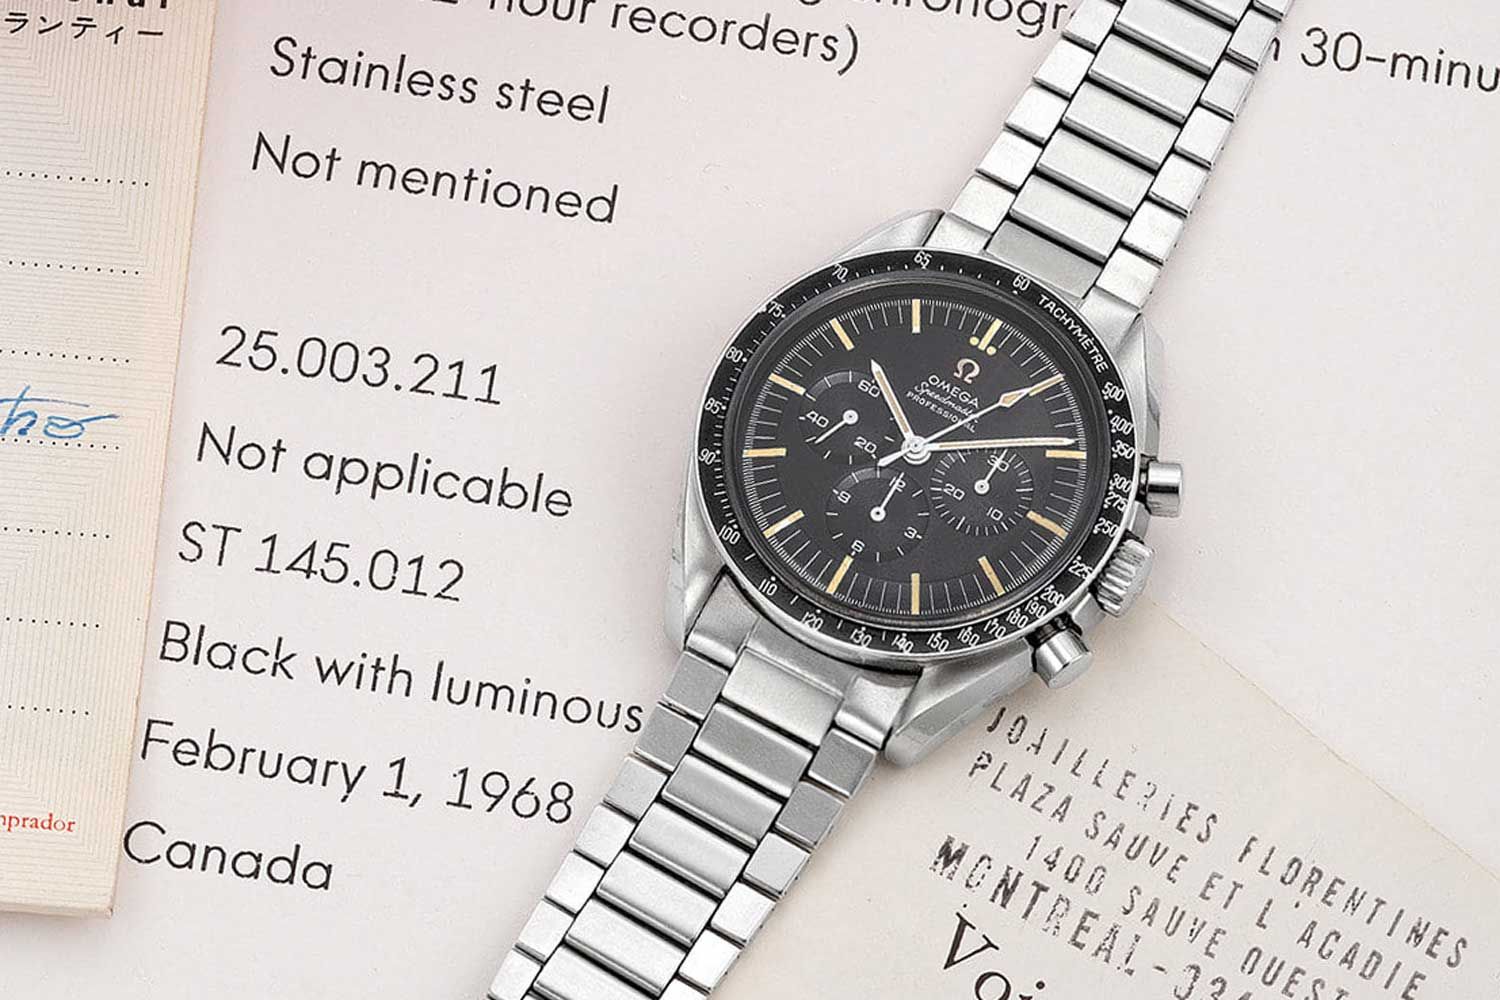 A excellent example of the Speedmaster ref. 145.012 sold by Phillips Watches at their July 2020 Hong Kong auction (philllips.com)